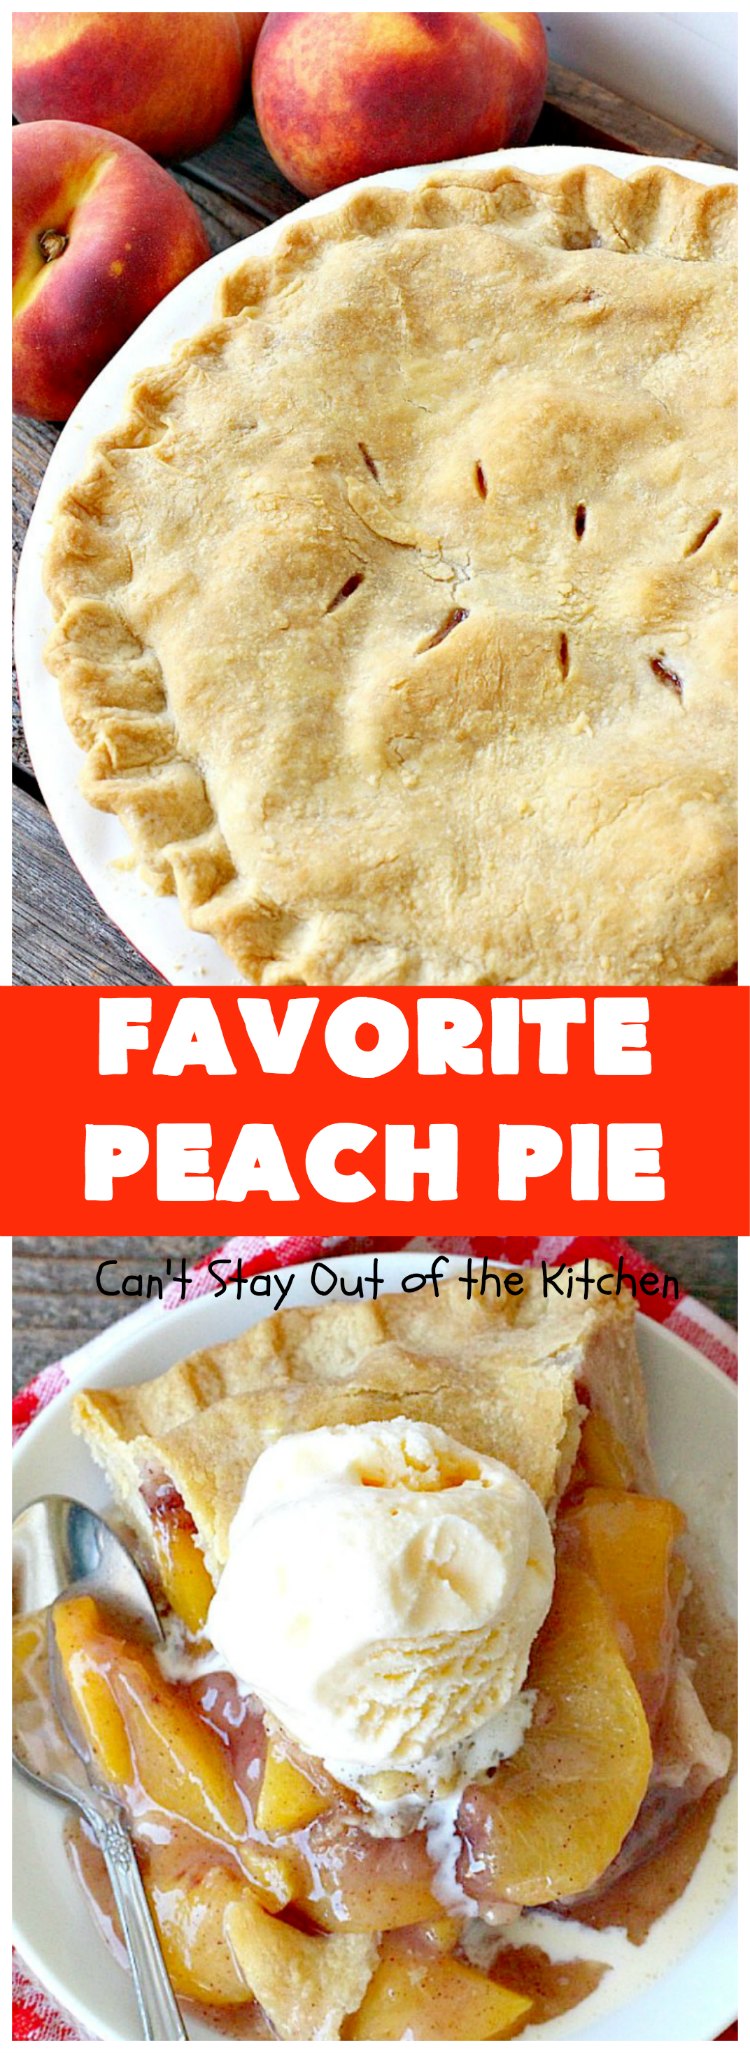 Mom's Peach Pie - Can't Stay Out of the Kitchen